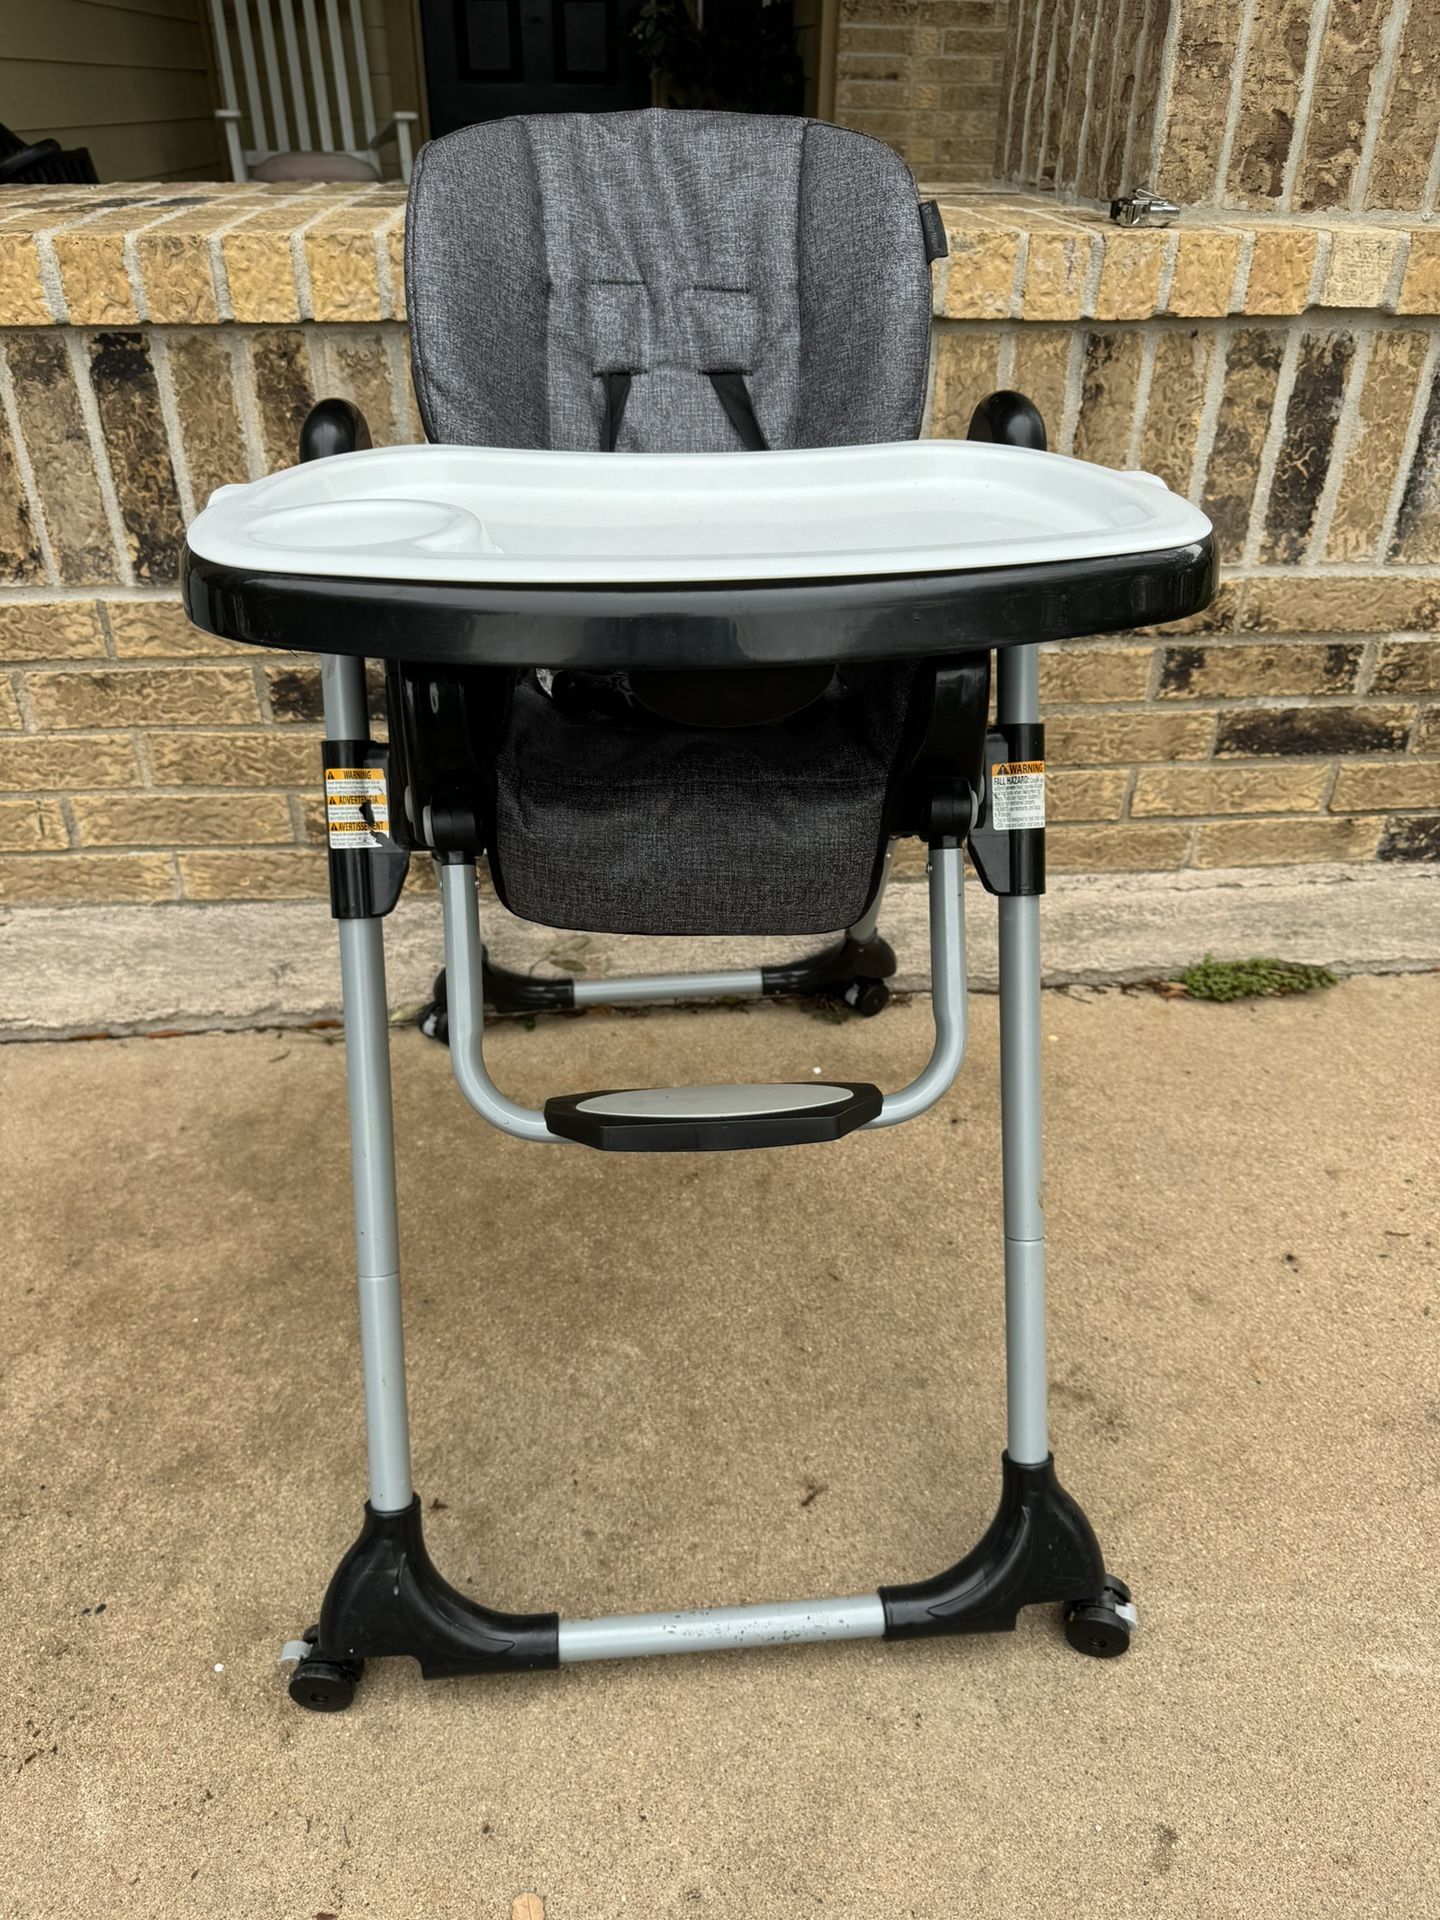 5-in-1 High Chair